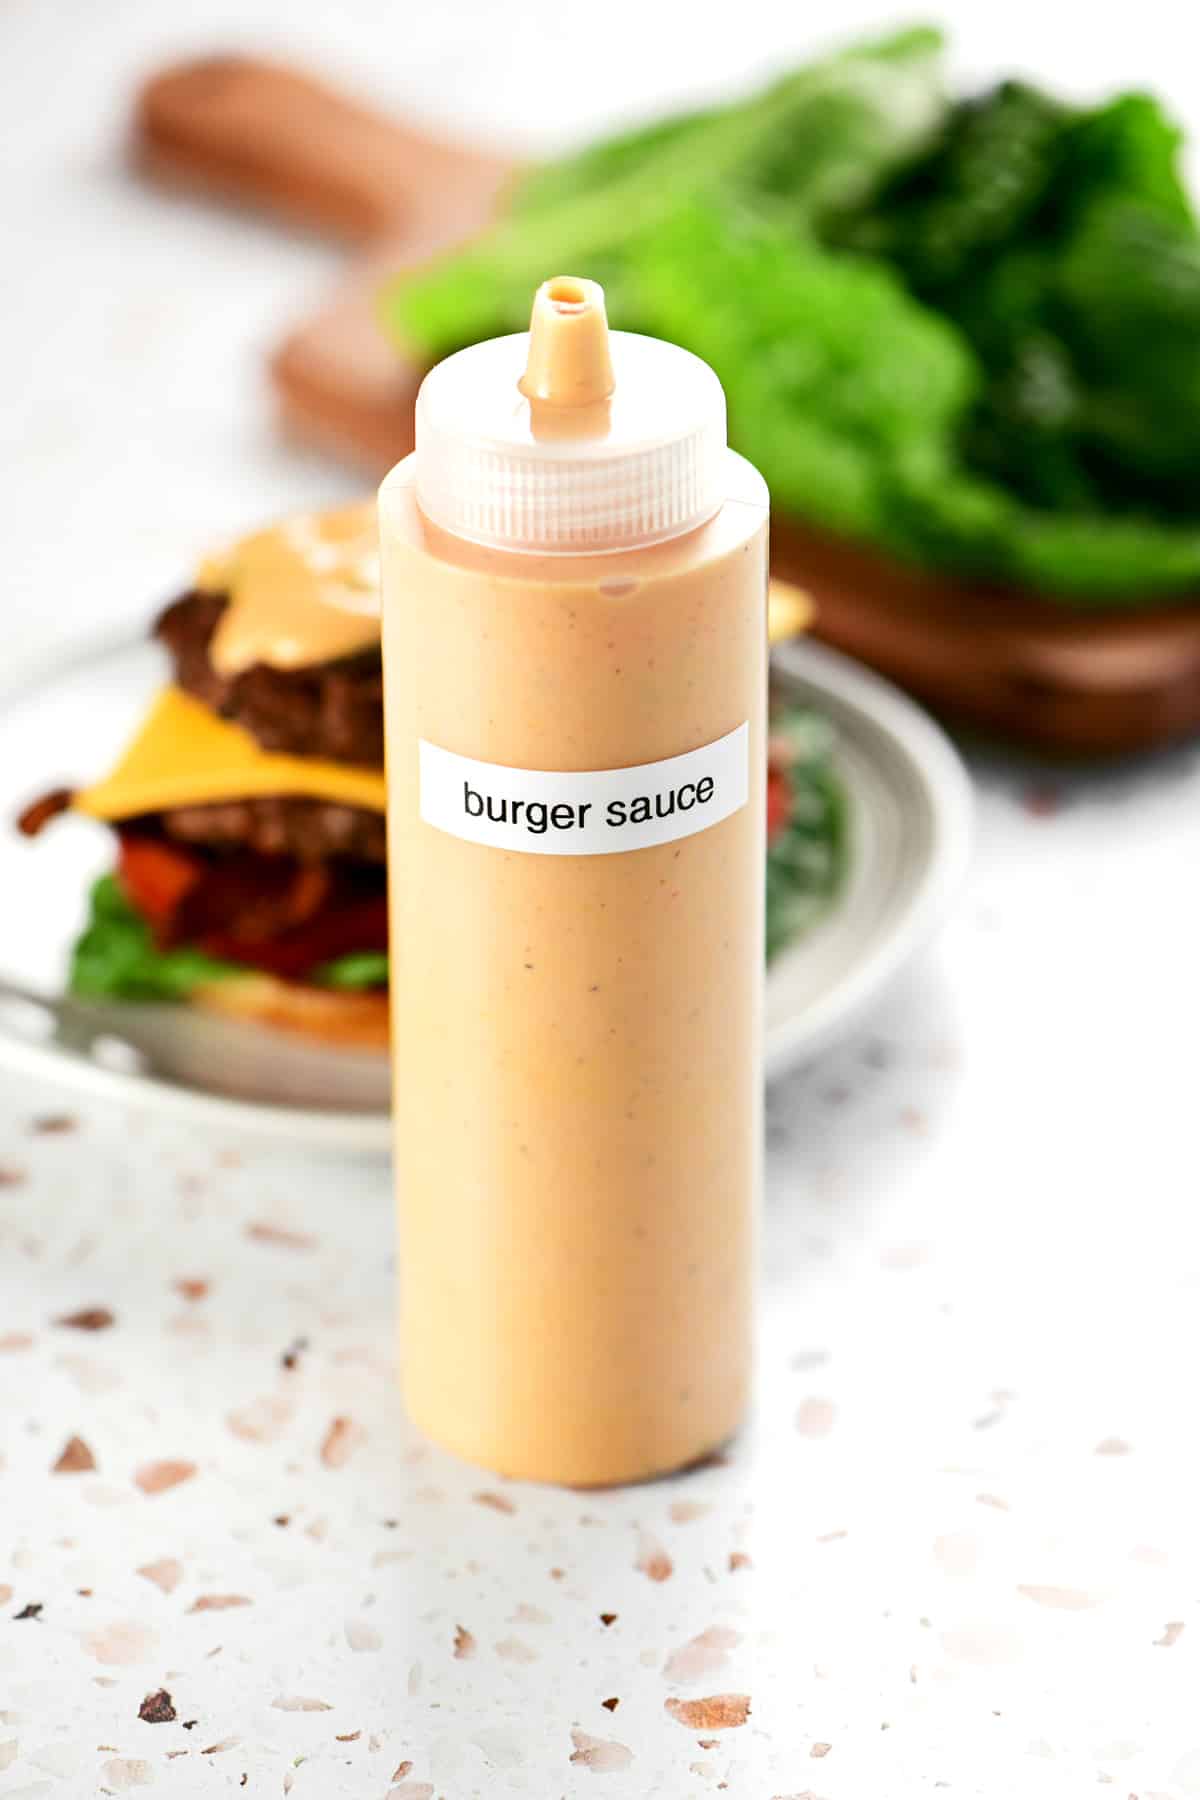 A condiment bottle with burger sauce inside.